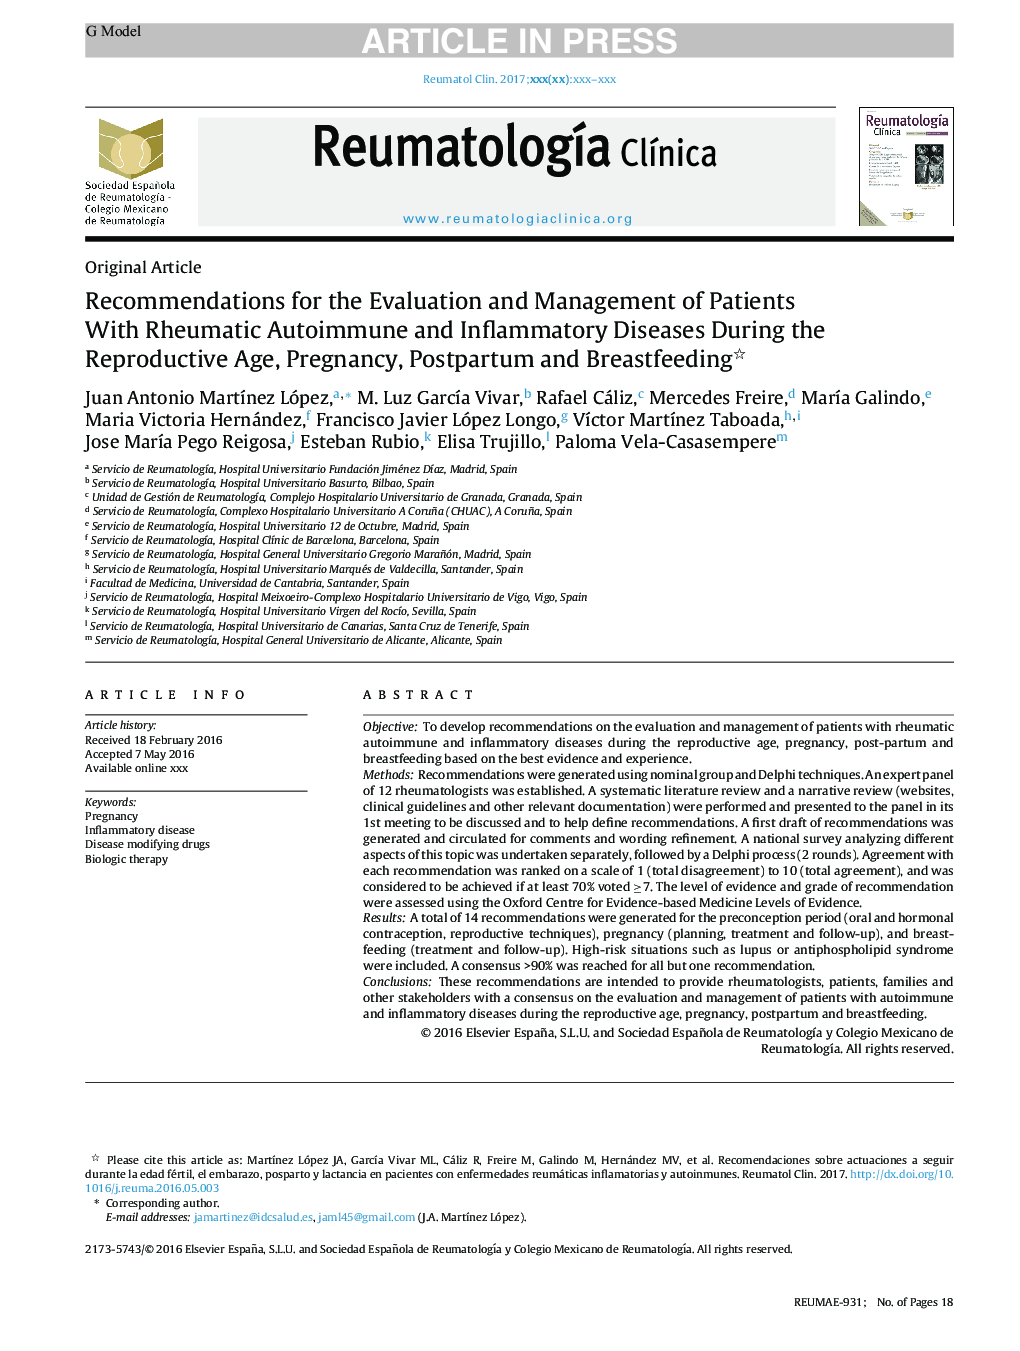 Recommendations for the Evaluation and Management of Patients With Rheumatic Autoimmune and Inflammatory Diseases During the Reproductive Age, Pregnancy, Postpartum and Breastfeeding